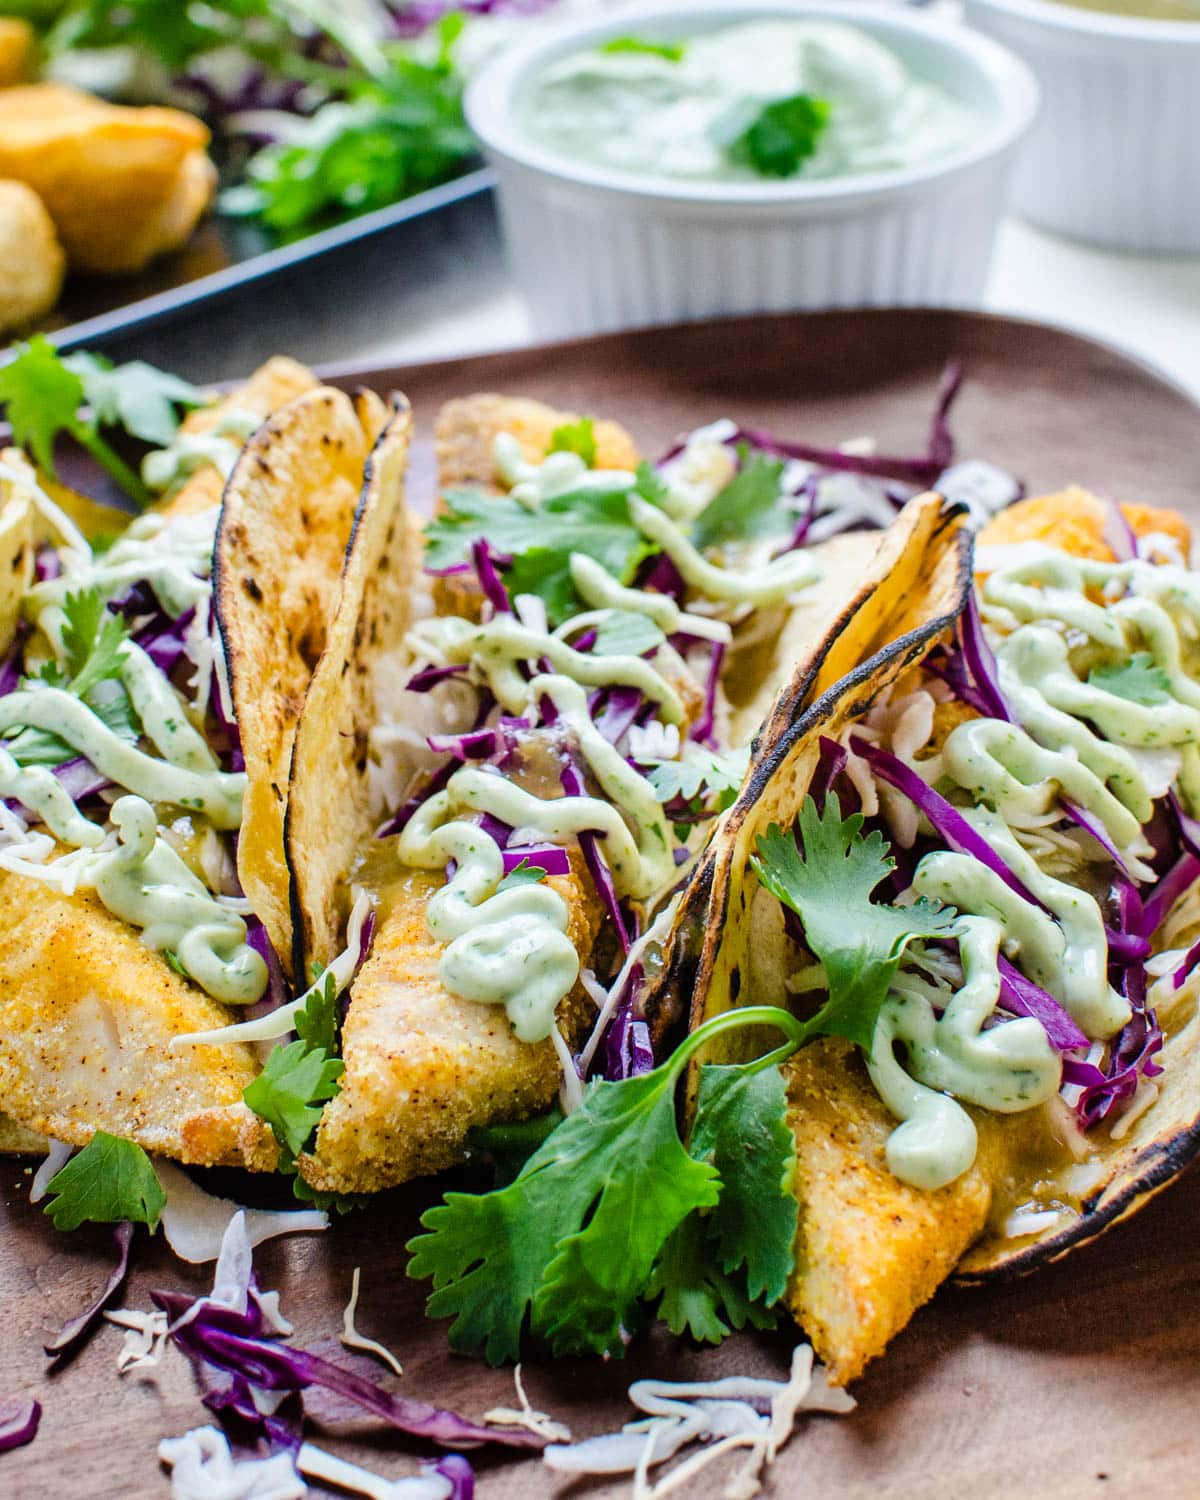 A plate of fish tacos with crema.